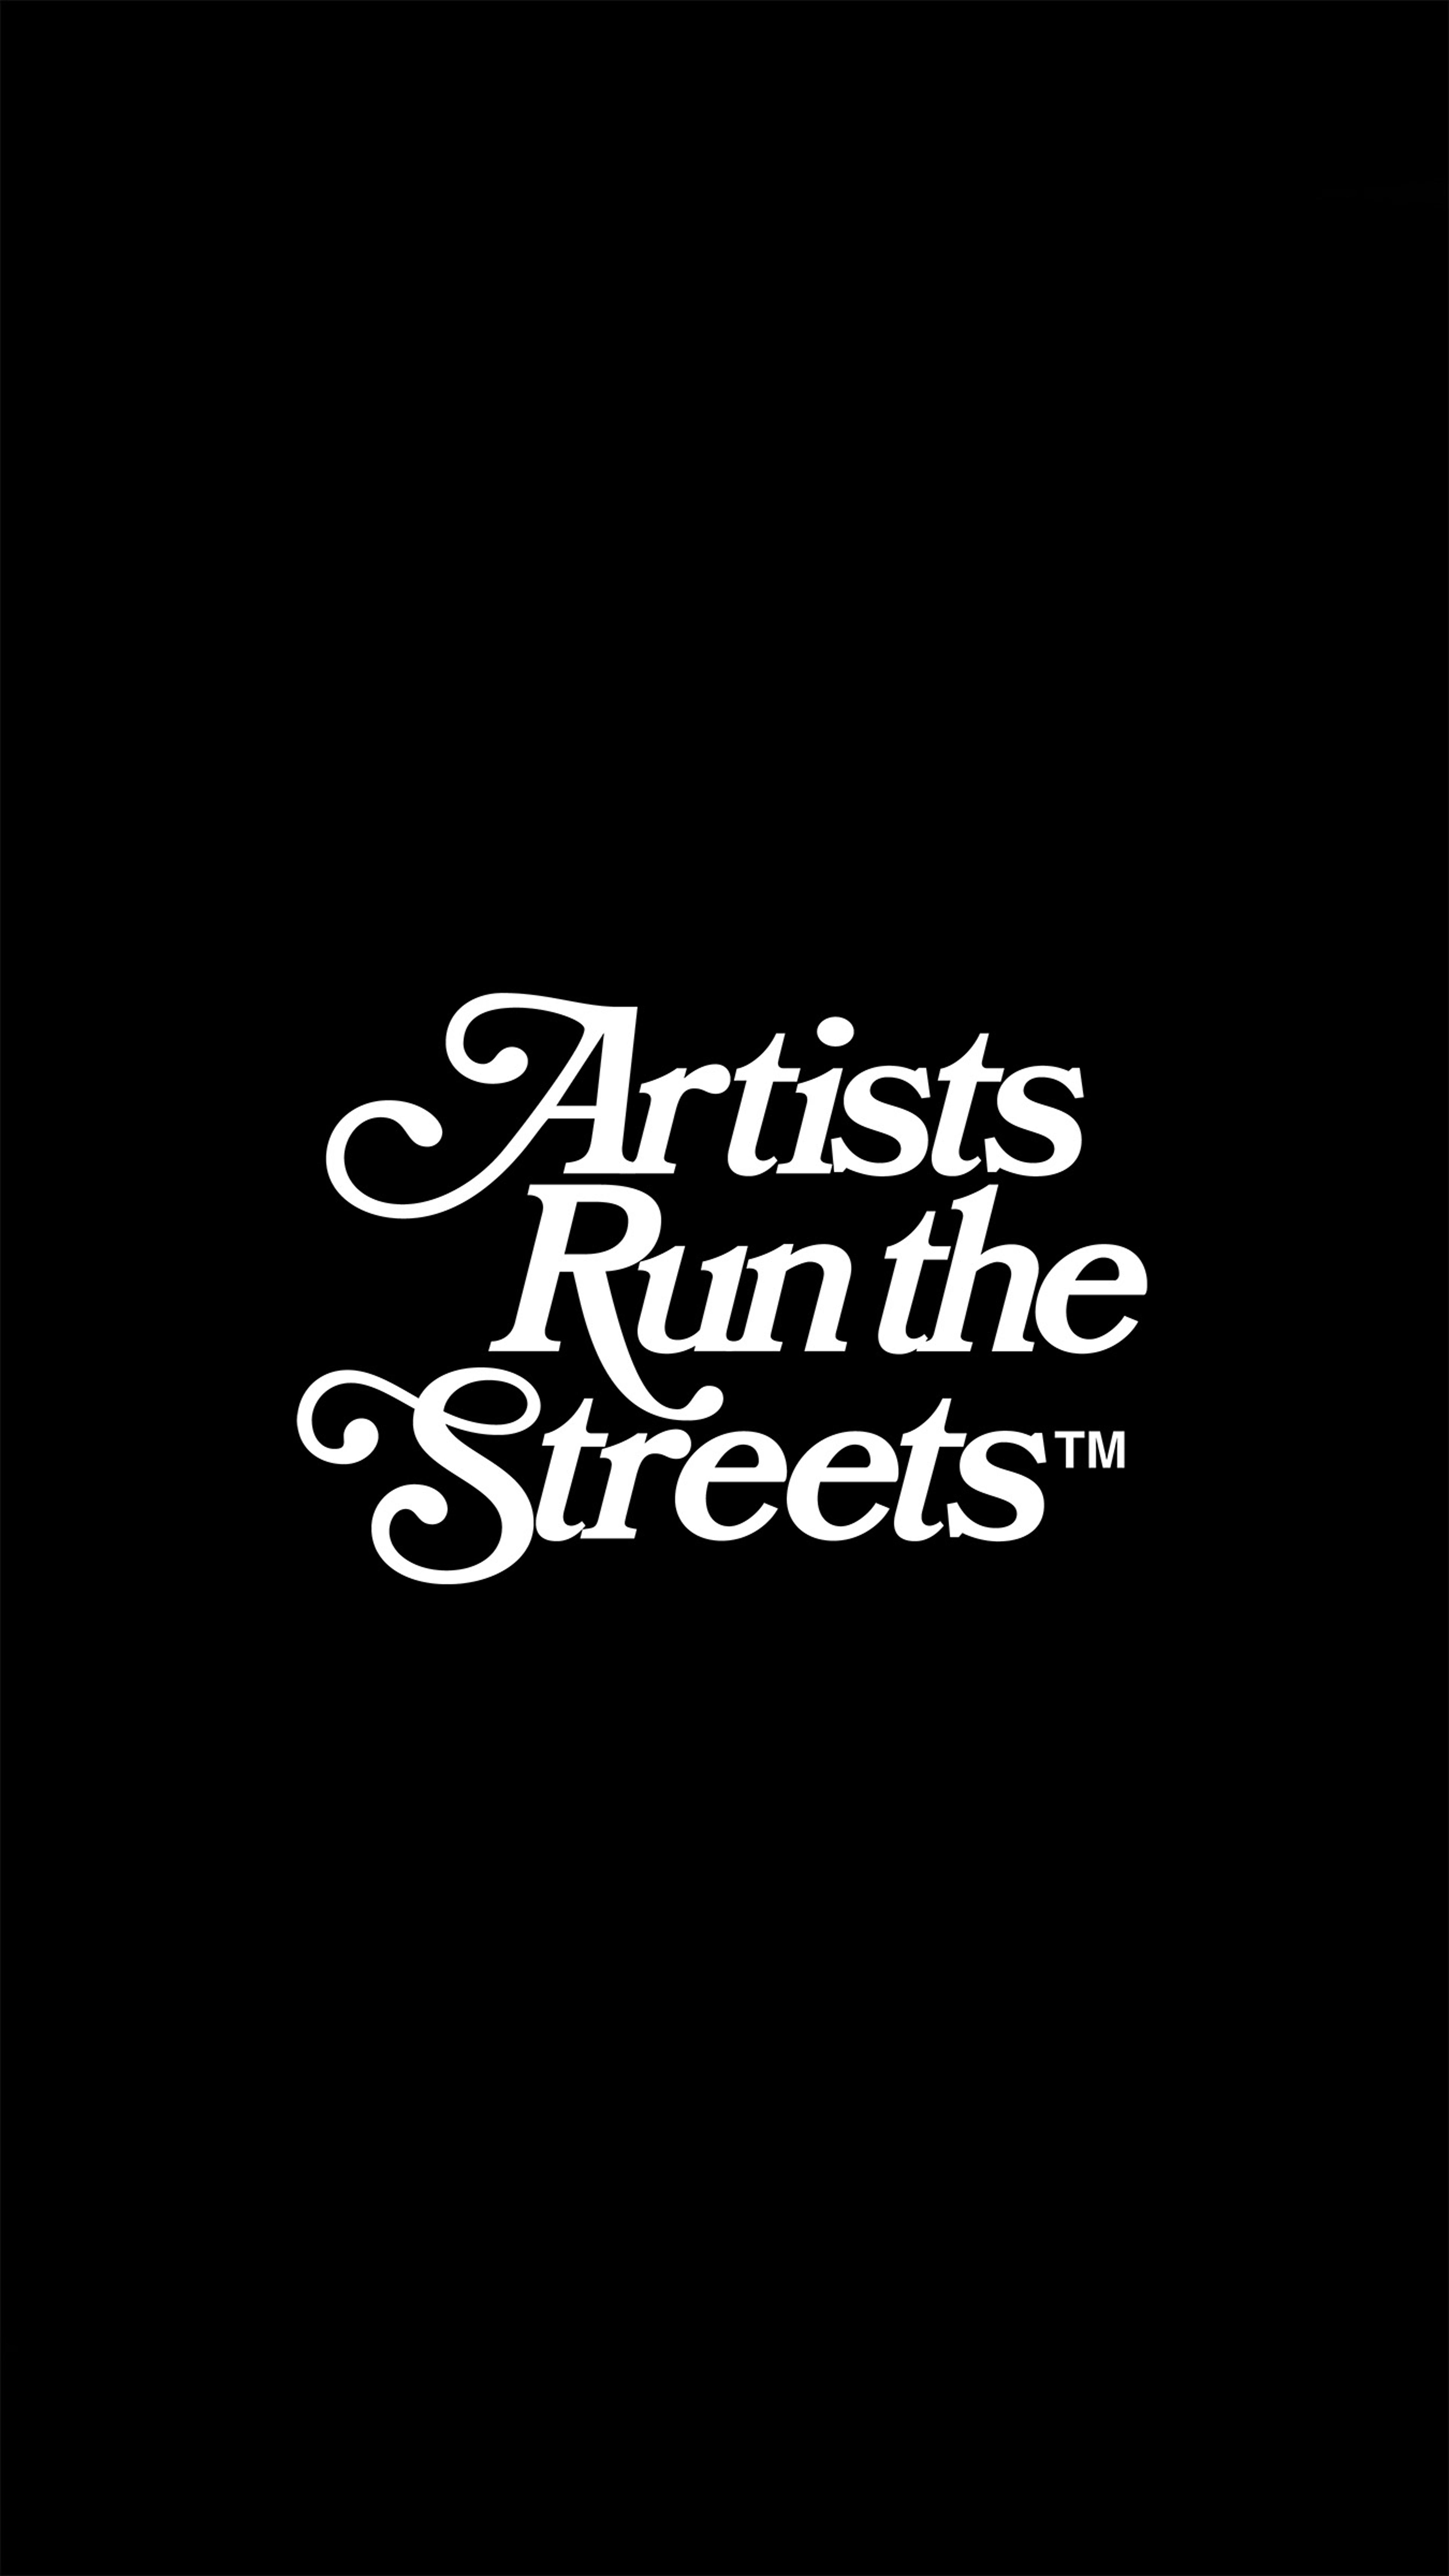 Preview image for the show titled "Artists Run The Streets™ Collection" at Monday @ 8:00 PM